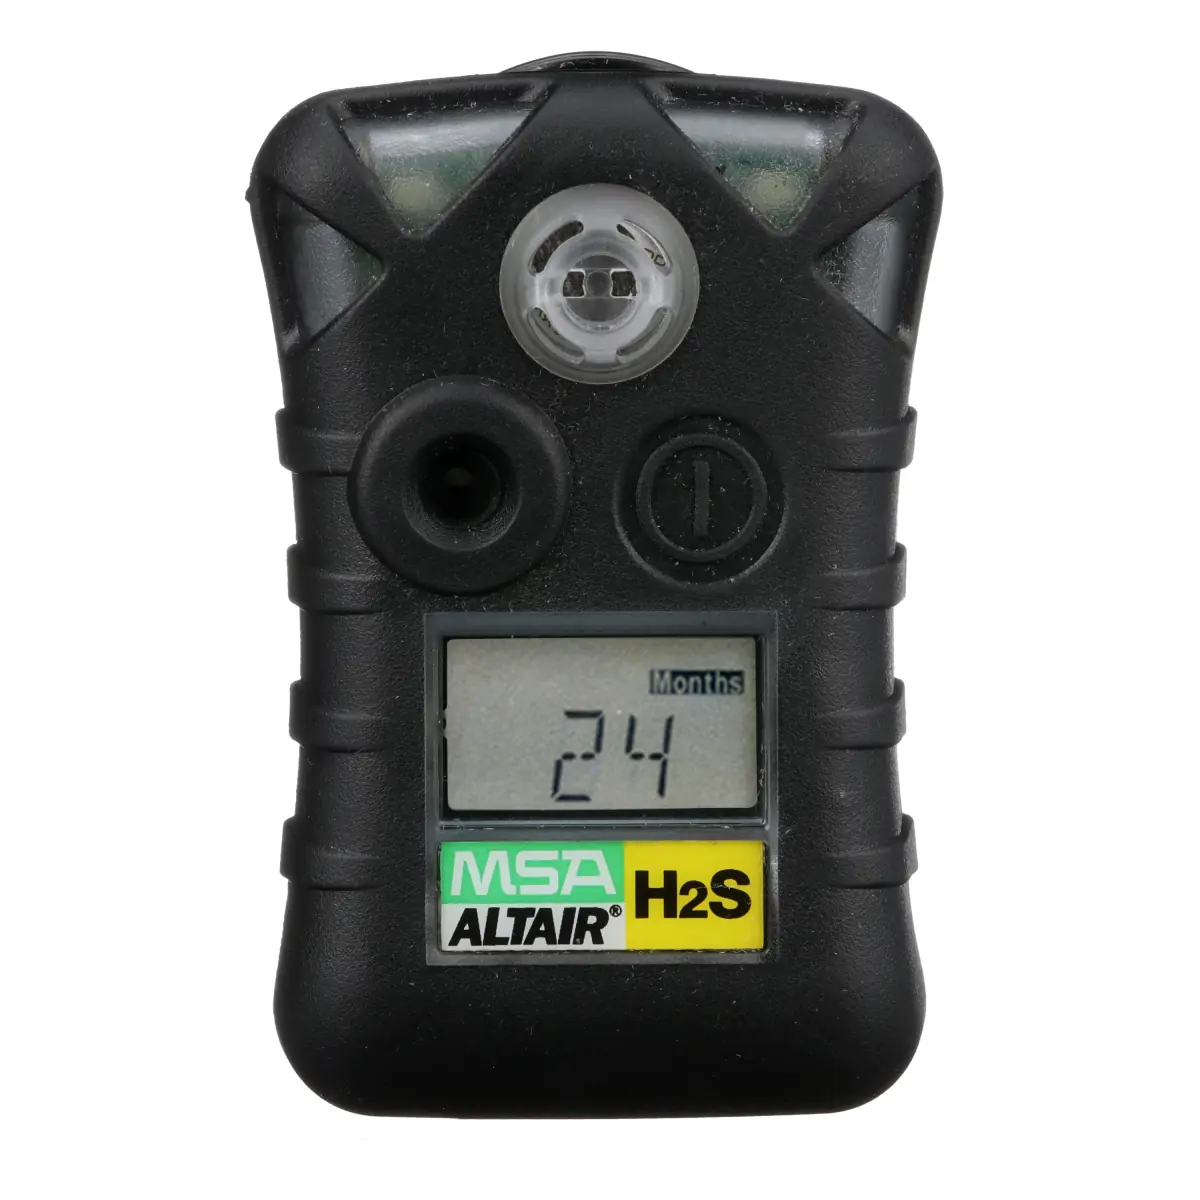 MSA Altair H2S - Draagbare waterstofsulfidedetector - 10071361